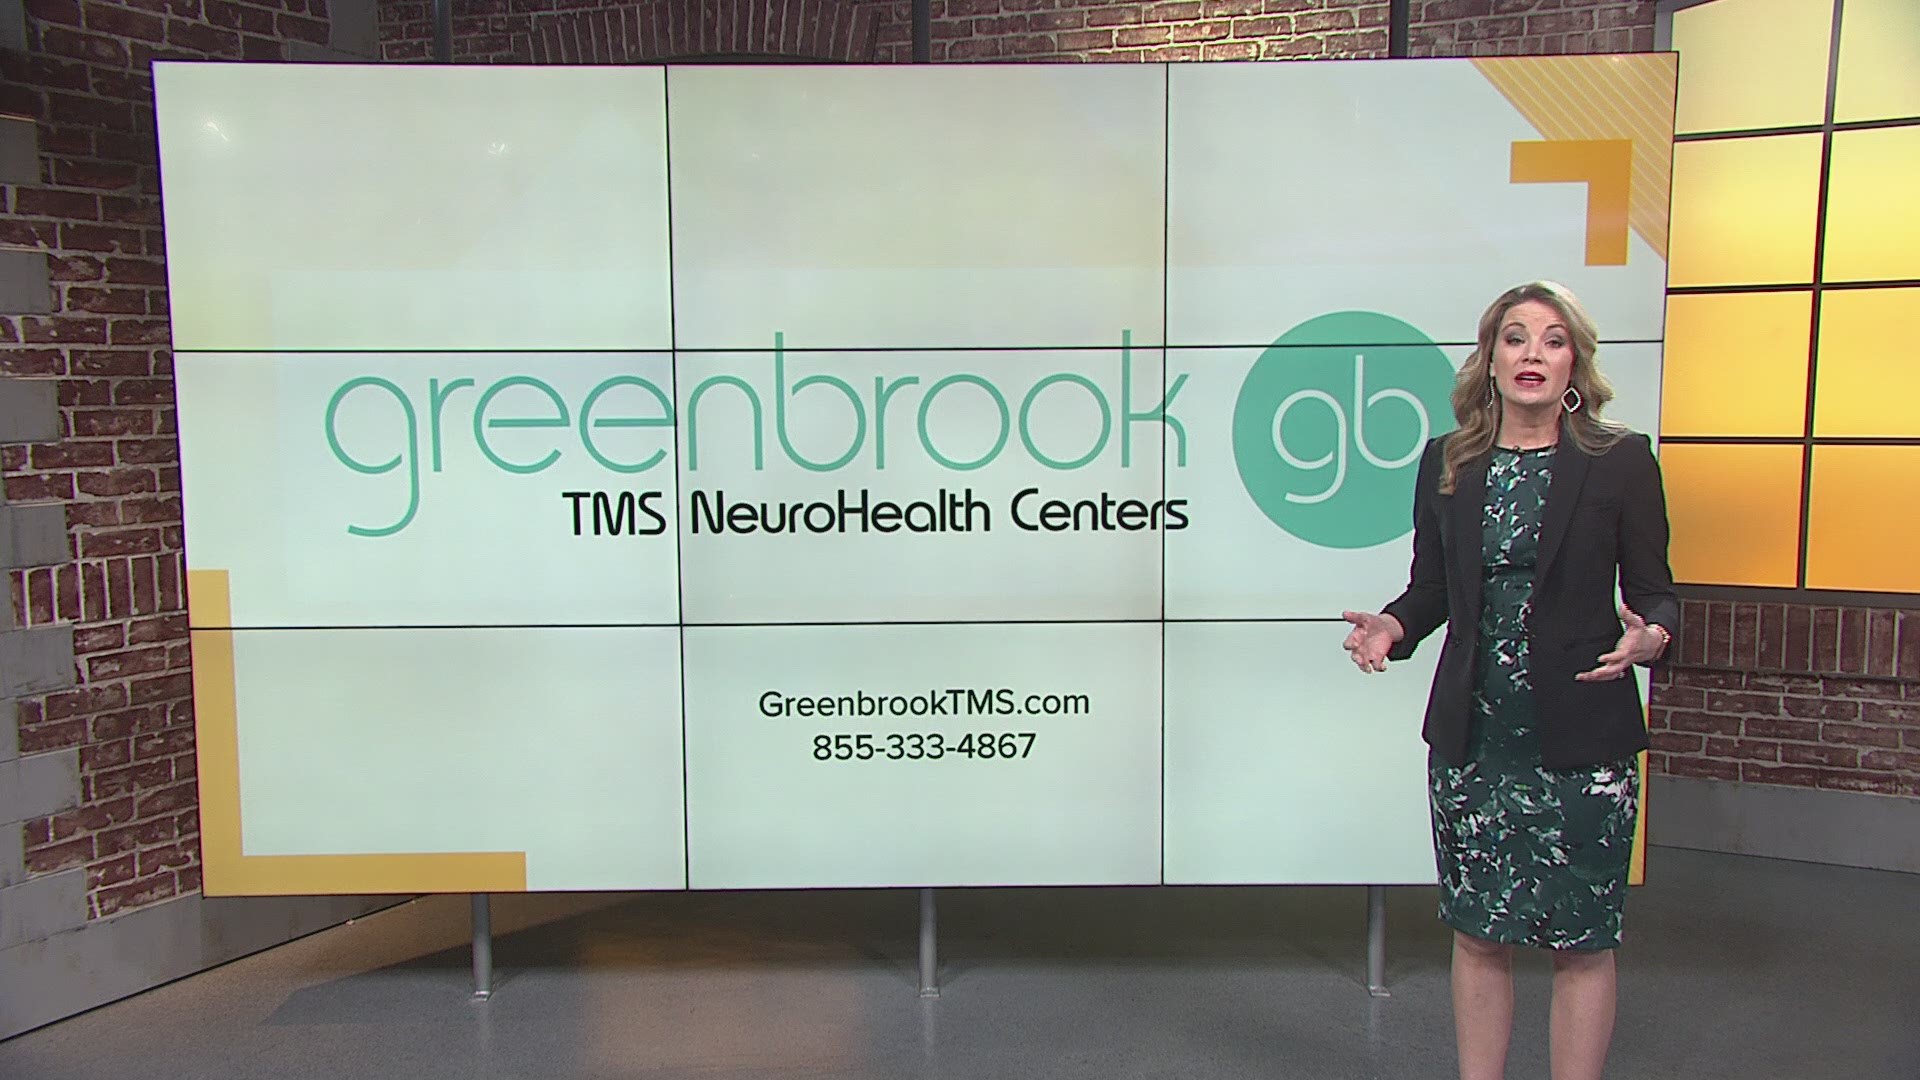 Dr. Geoffrey Grammer, Chief Medical Officer of Greenbrook TMS shares how their sessions can help people with depression. This segment is sponsored by Greenbrook TMS.